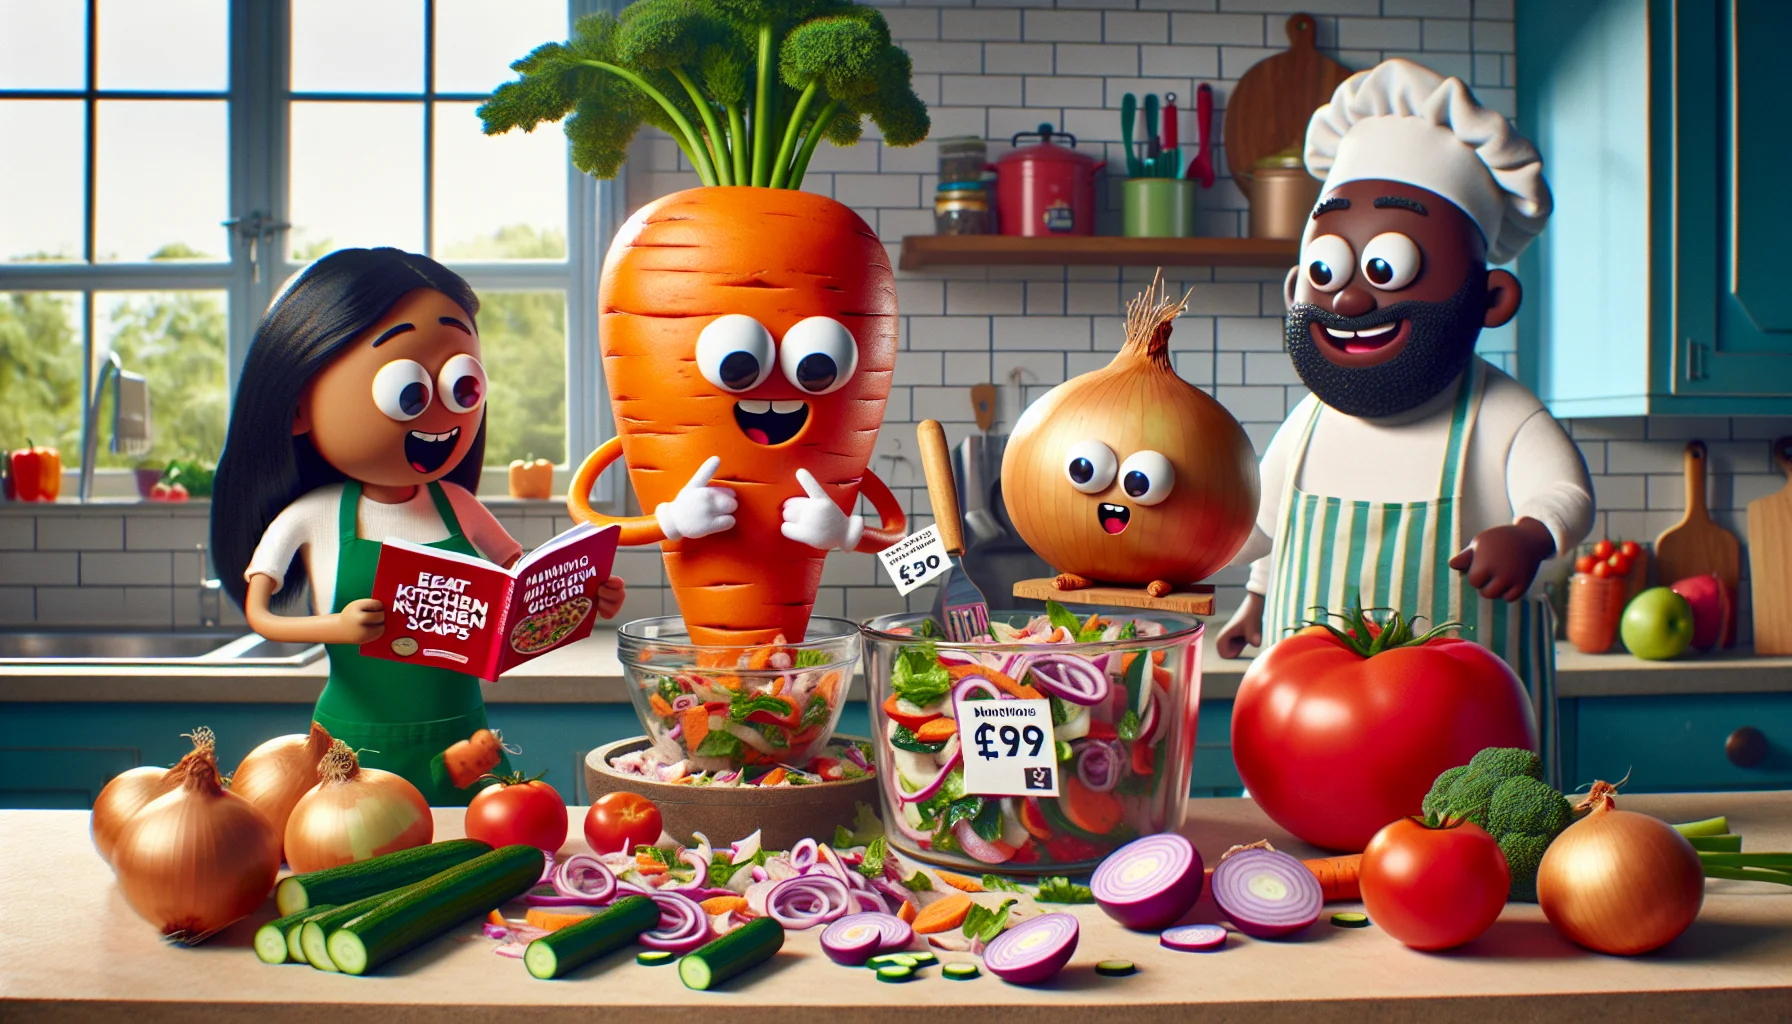 Picture this: In the center of a brightly lit kitchen, an animated, oversized carrot and onion, both with cute faces, are using tiny cooking utensils to transform kitchen scraps into a delicious, colorful salad. On the side, a tomato is reading a cookbook titled 'Maximizing Kitchen Scraps'. To add humor, incorporate an excited South Asian woman and a skeptical Black man, dressed as chefs, looking on in surprise at the scene. Visible price tags on the scraps indicate a low cost, highlighting that eating healthy doesn't need to be expensive. A text bubble from the onion says, 'Eat healthily, save money!'